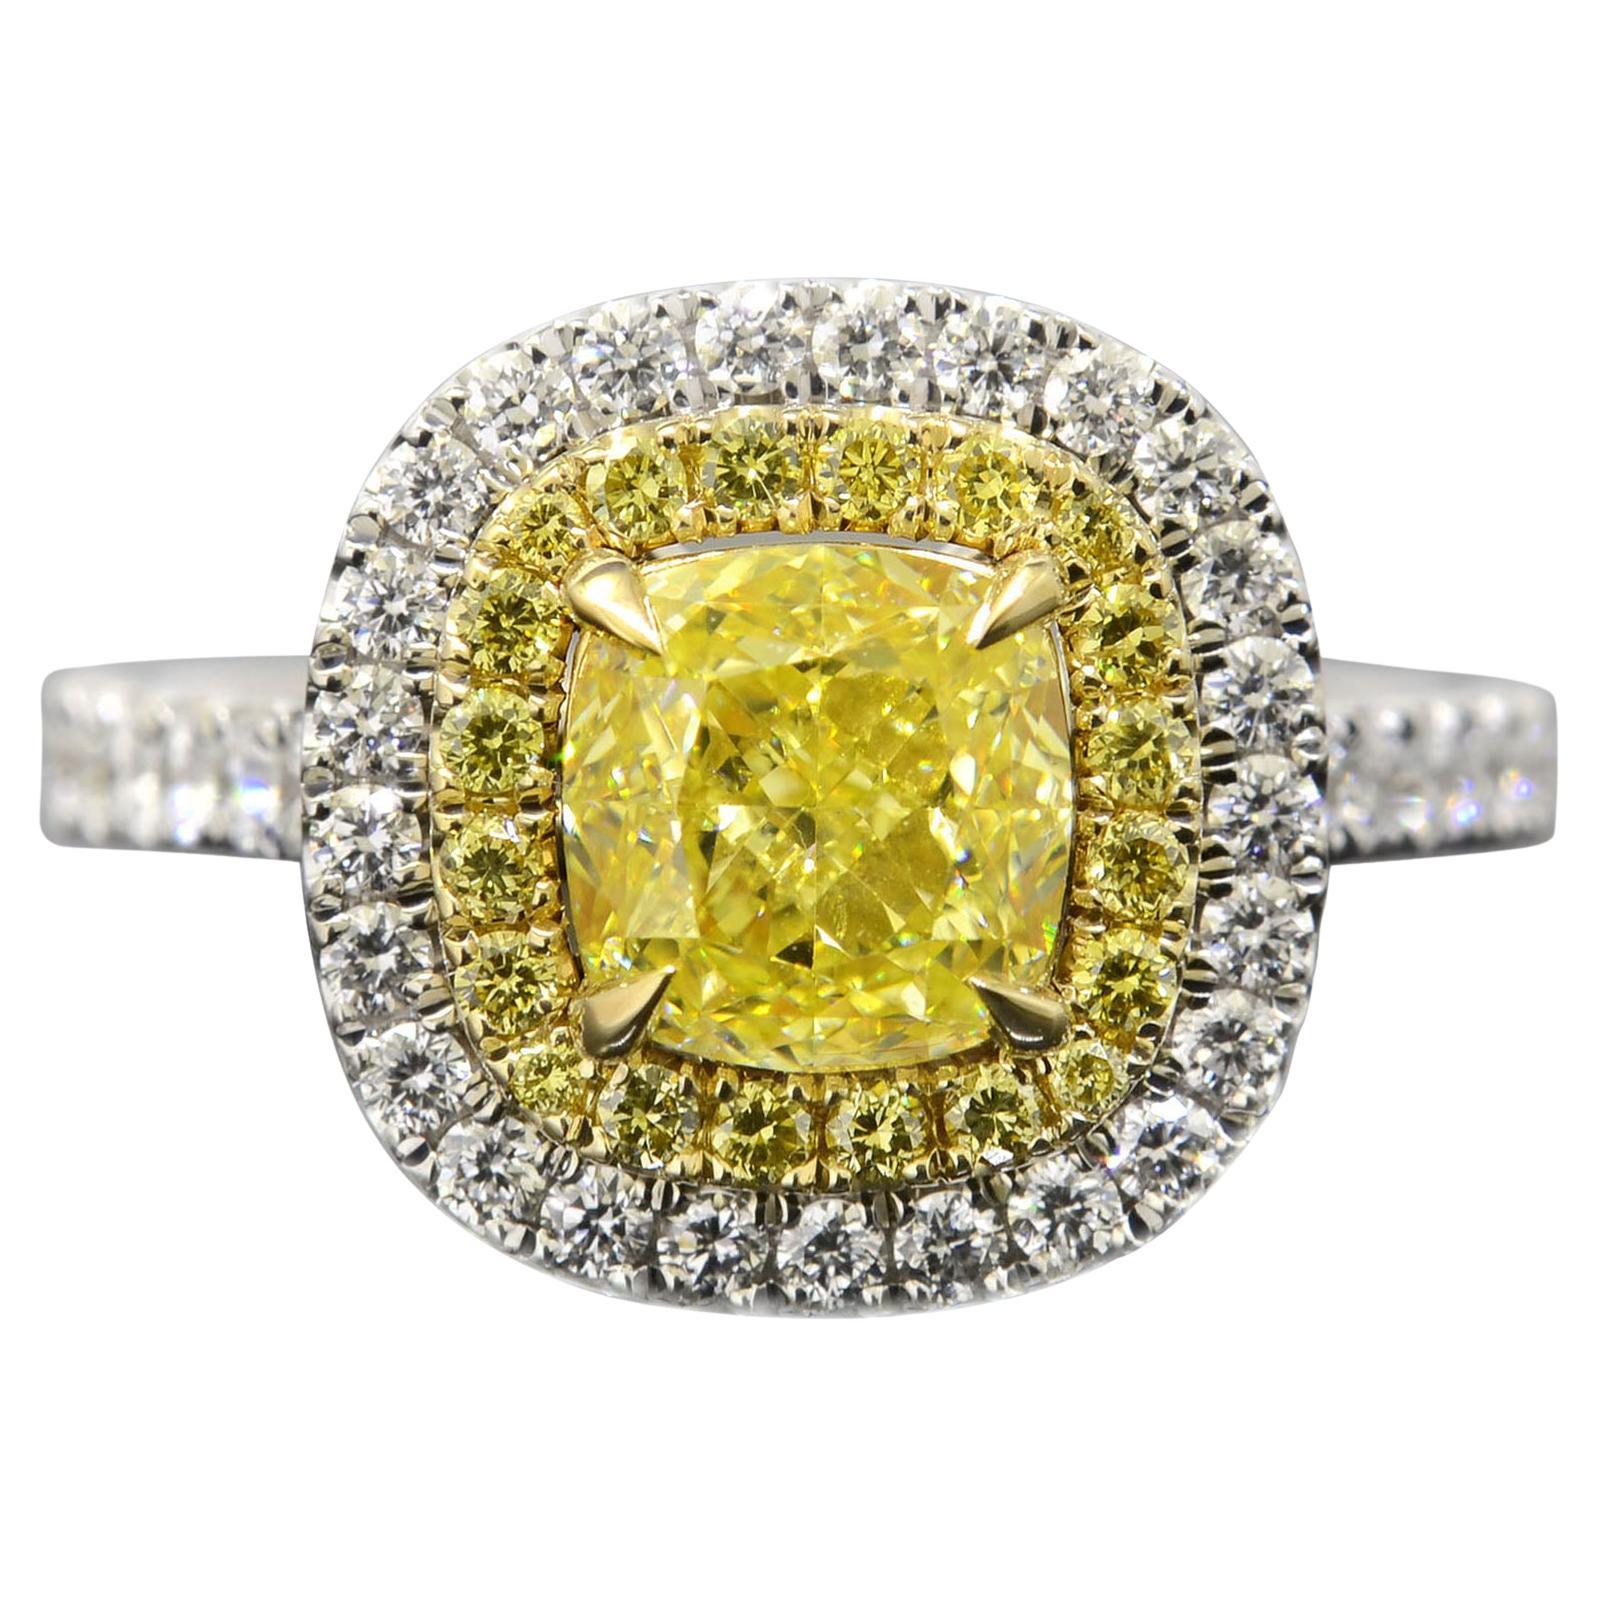 2.50 Ct Fancy Yellow Dual Halo Cushion Engagement Ring VS2 Clarity GIA Certified For Sale